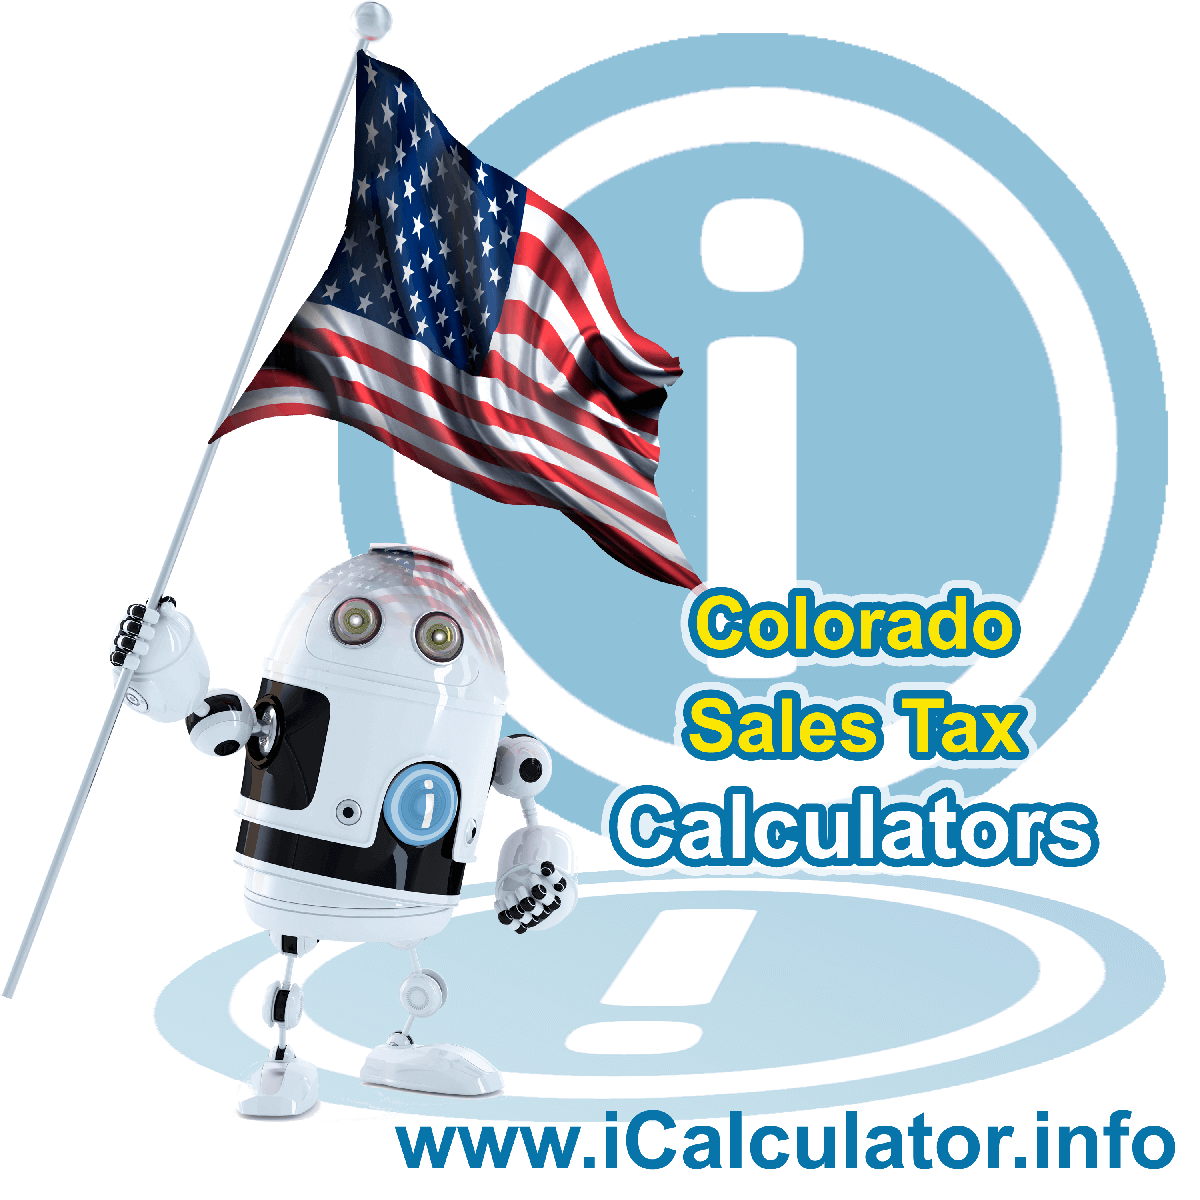 Custer County Sales Rates: This image illustrates a calculator robot calculating Custer County sales tax manually using the Custer County Sales Tax Formula. You can use this information to calculate Custer County Sales Tax manually or use the Custer County Sales Tax Calculator to calculate sales tax online.